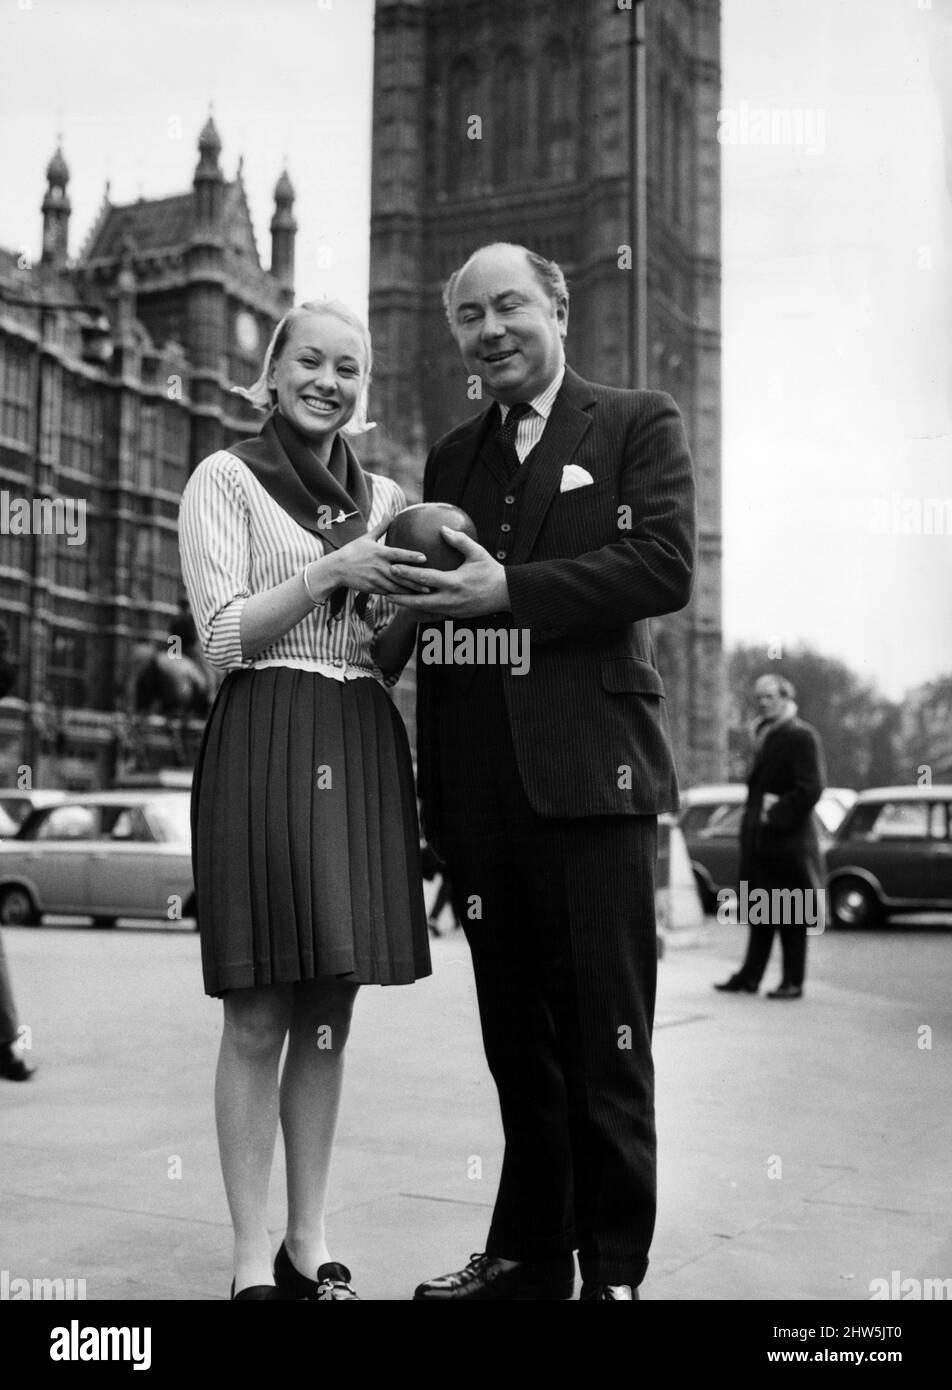 William van Straubenzee, Member of Parliament for Wokingham, is presented with a dutch edam cheese from Annelieu Van Der Giessen, outside the Houses of Parliament, London, after he complained that there were no foreign cheeses available to members in the dining rooms, pictured 5th March 1968. Stock Photo